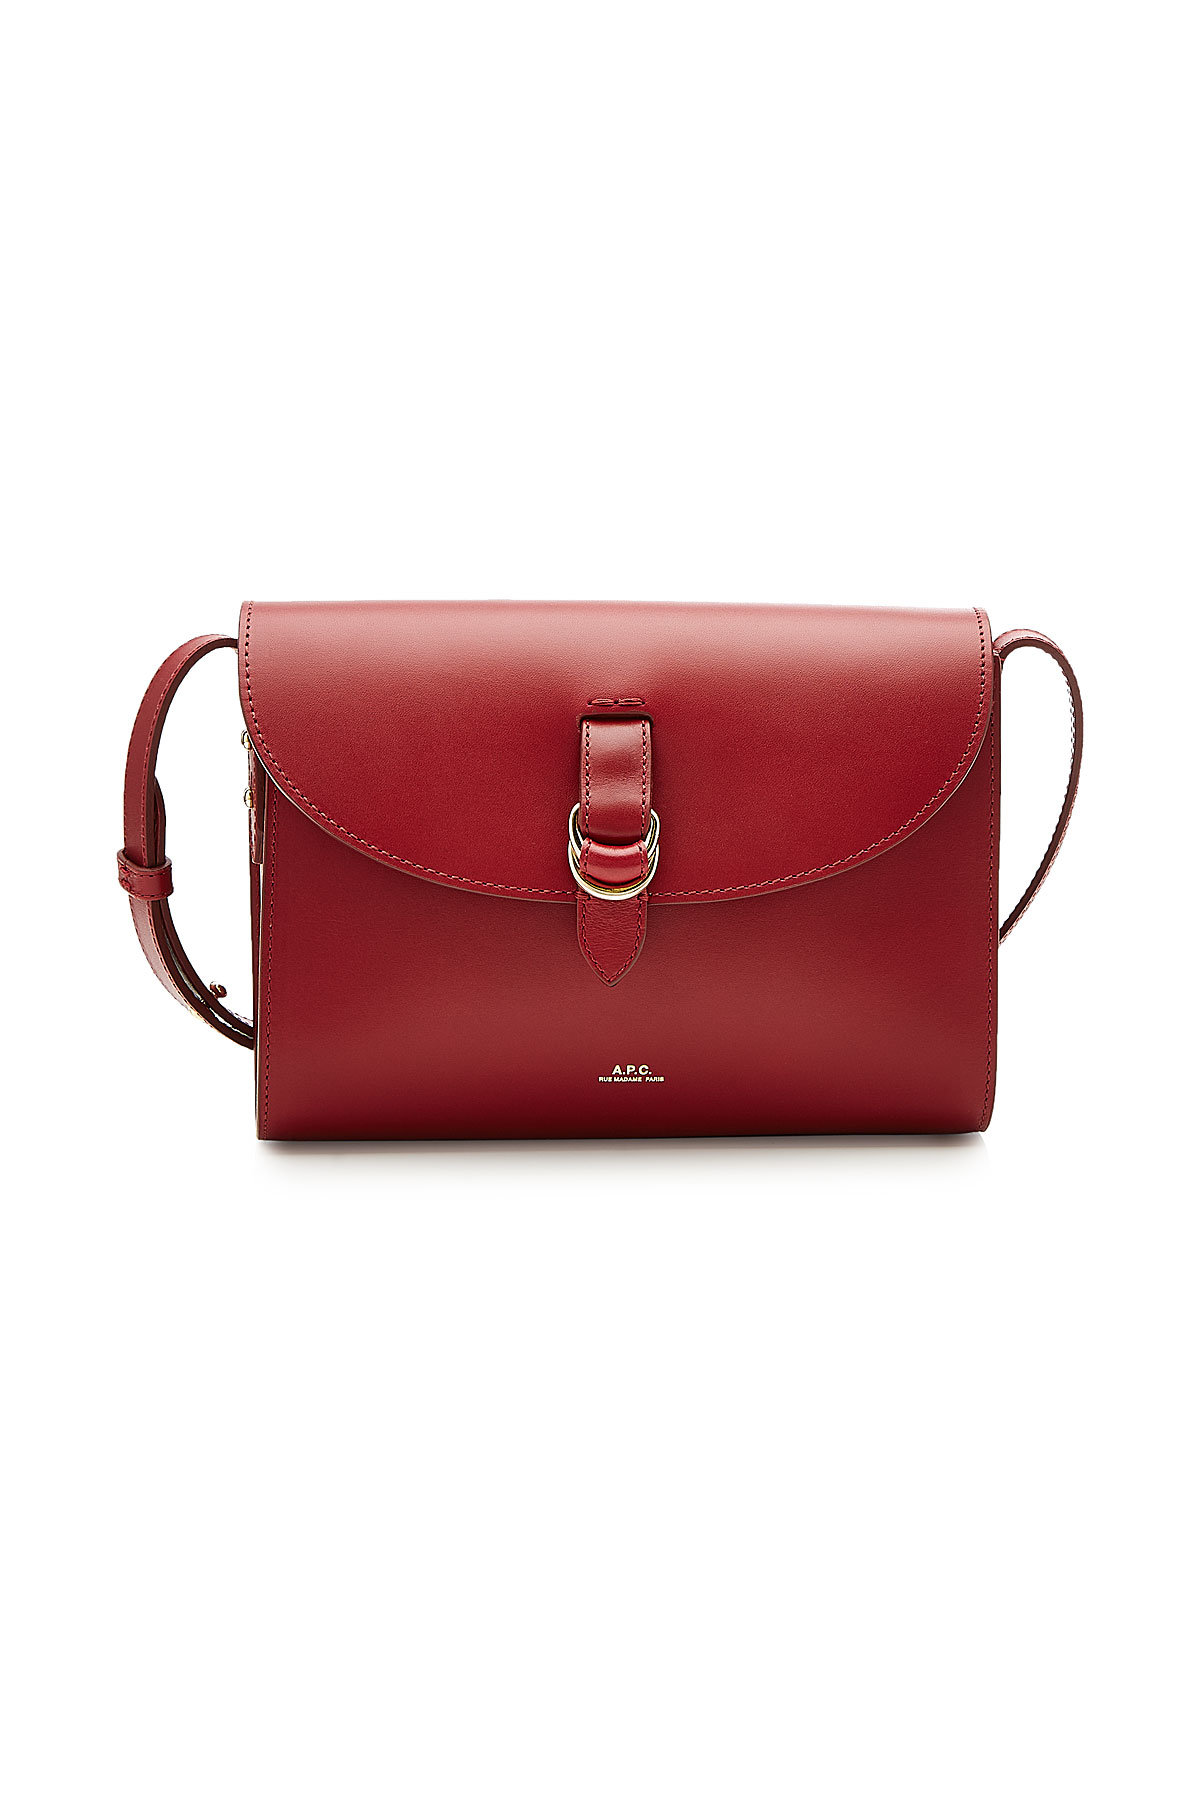 Alicia Leather Shoulder Bag by A.P.C.